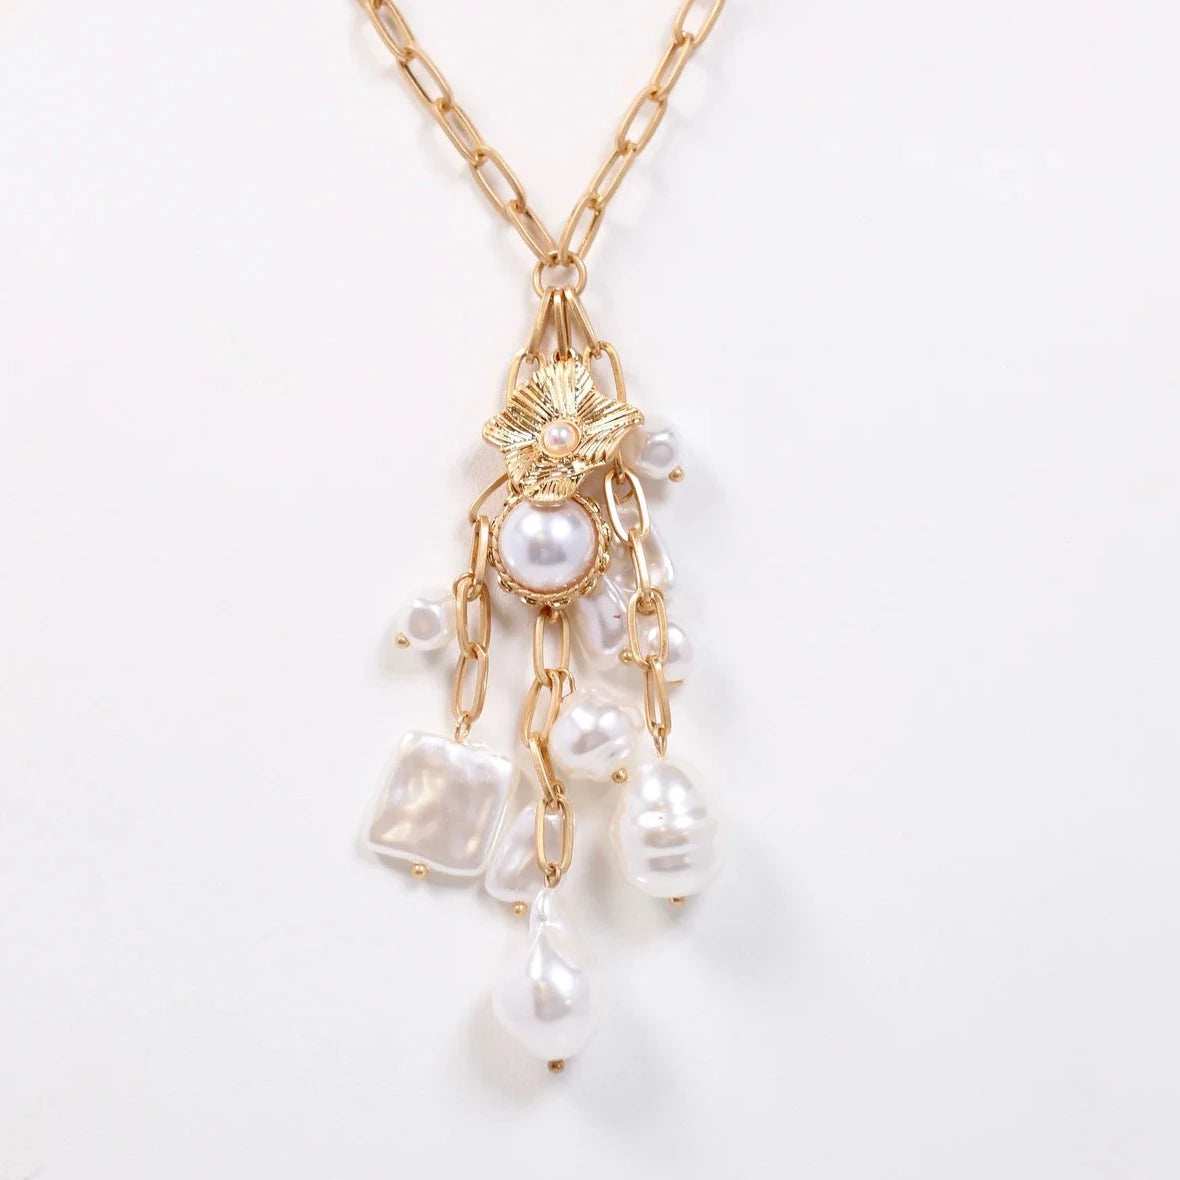 Kildare Necklace with Pearls-Necklaces-Caroline Hill-LouisGeorge Boutique, Women’s Fashion Boutique Located in Trussville, Alabama